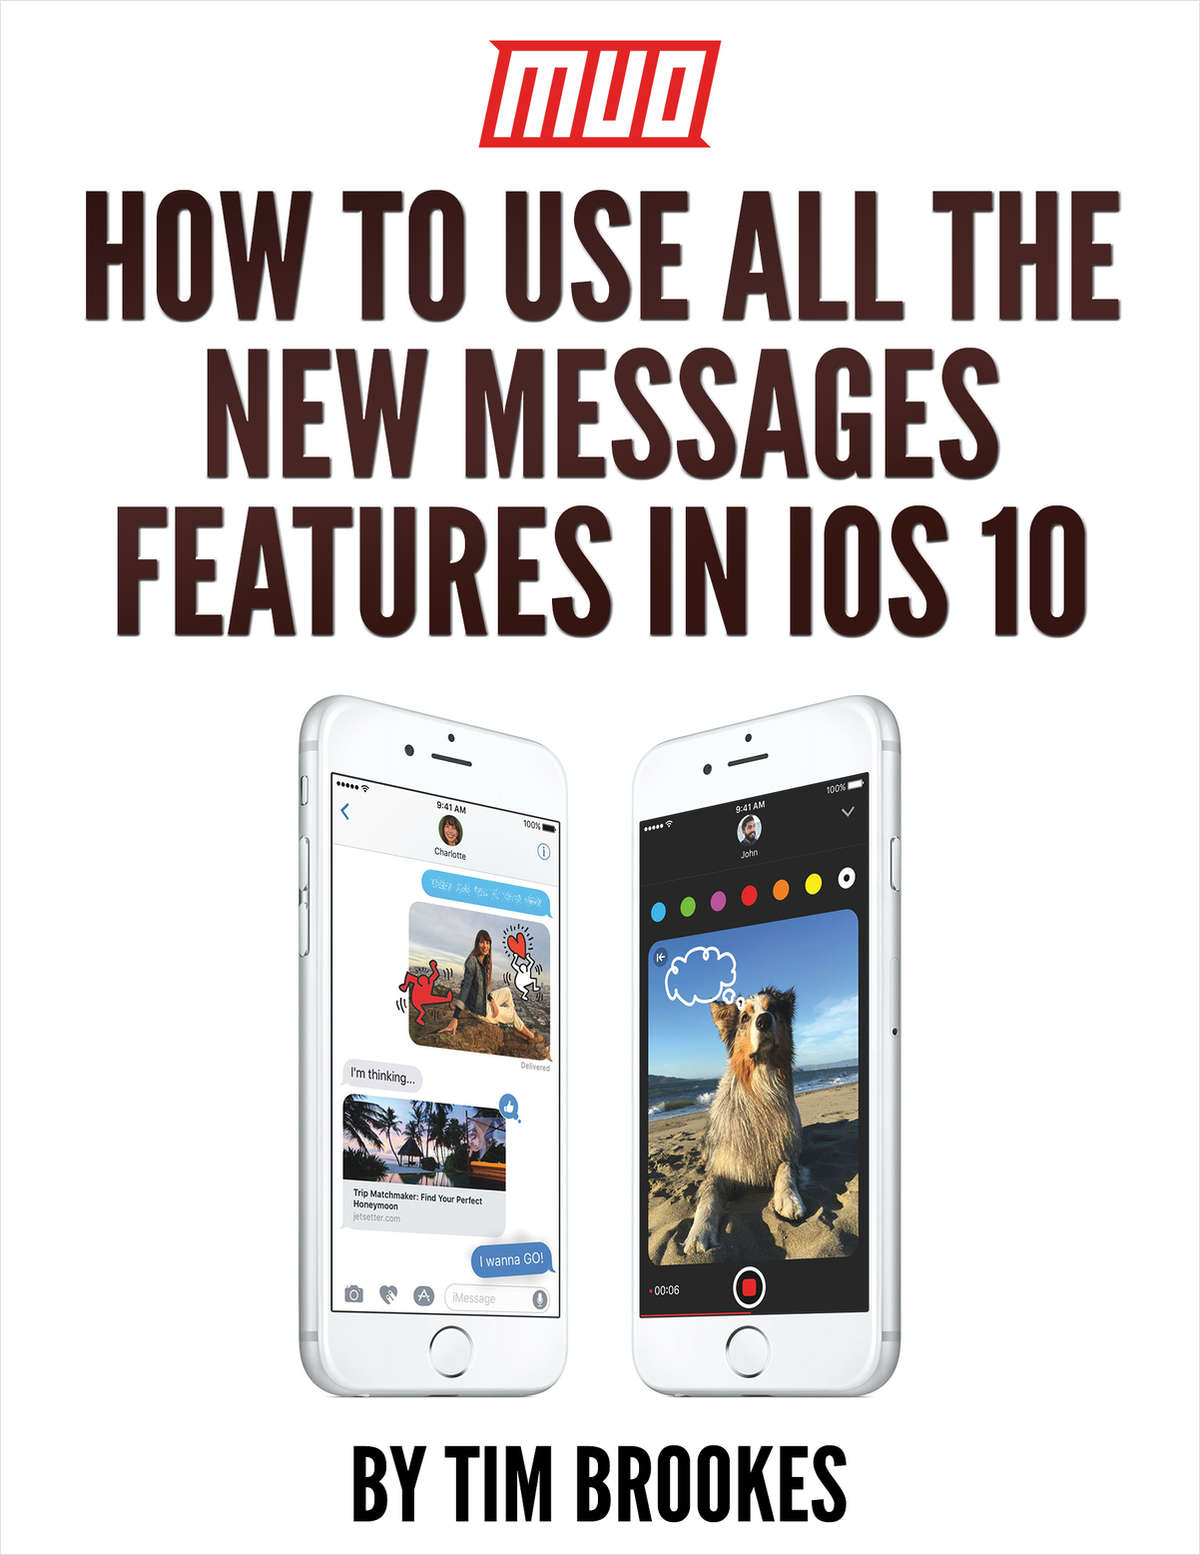 How to Use All the New Messages Features in iOS 10